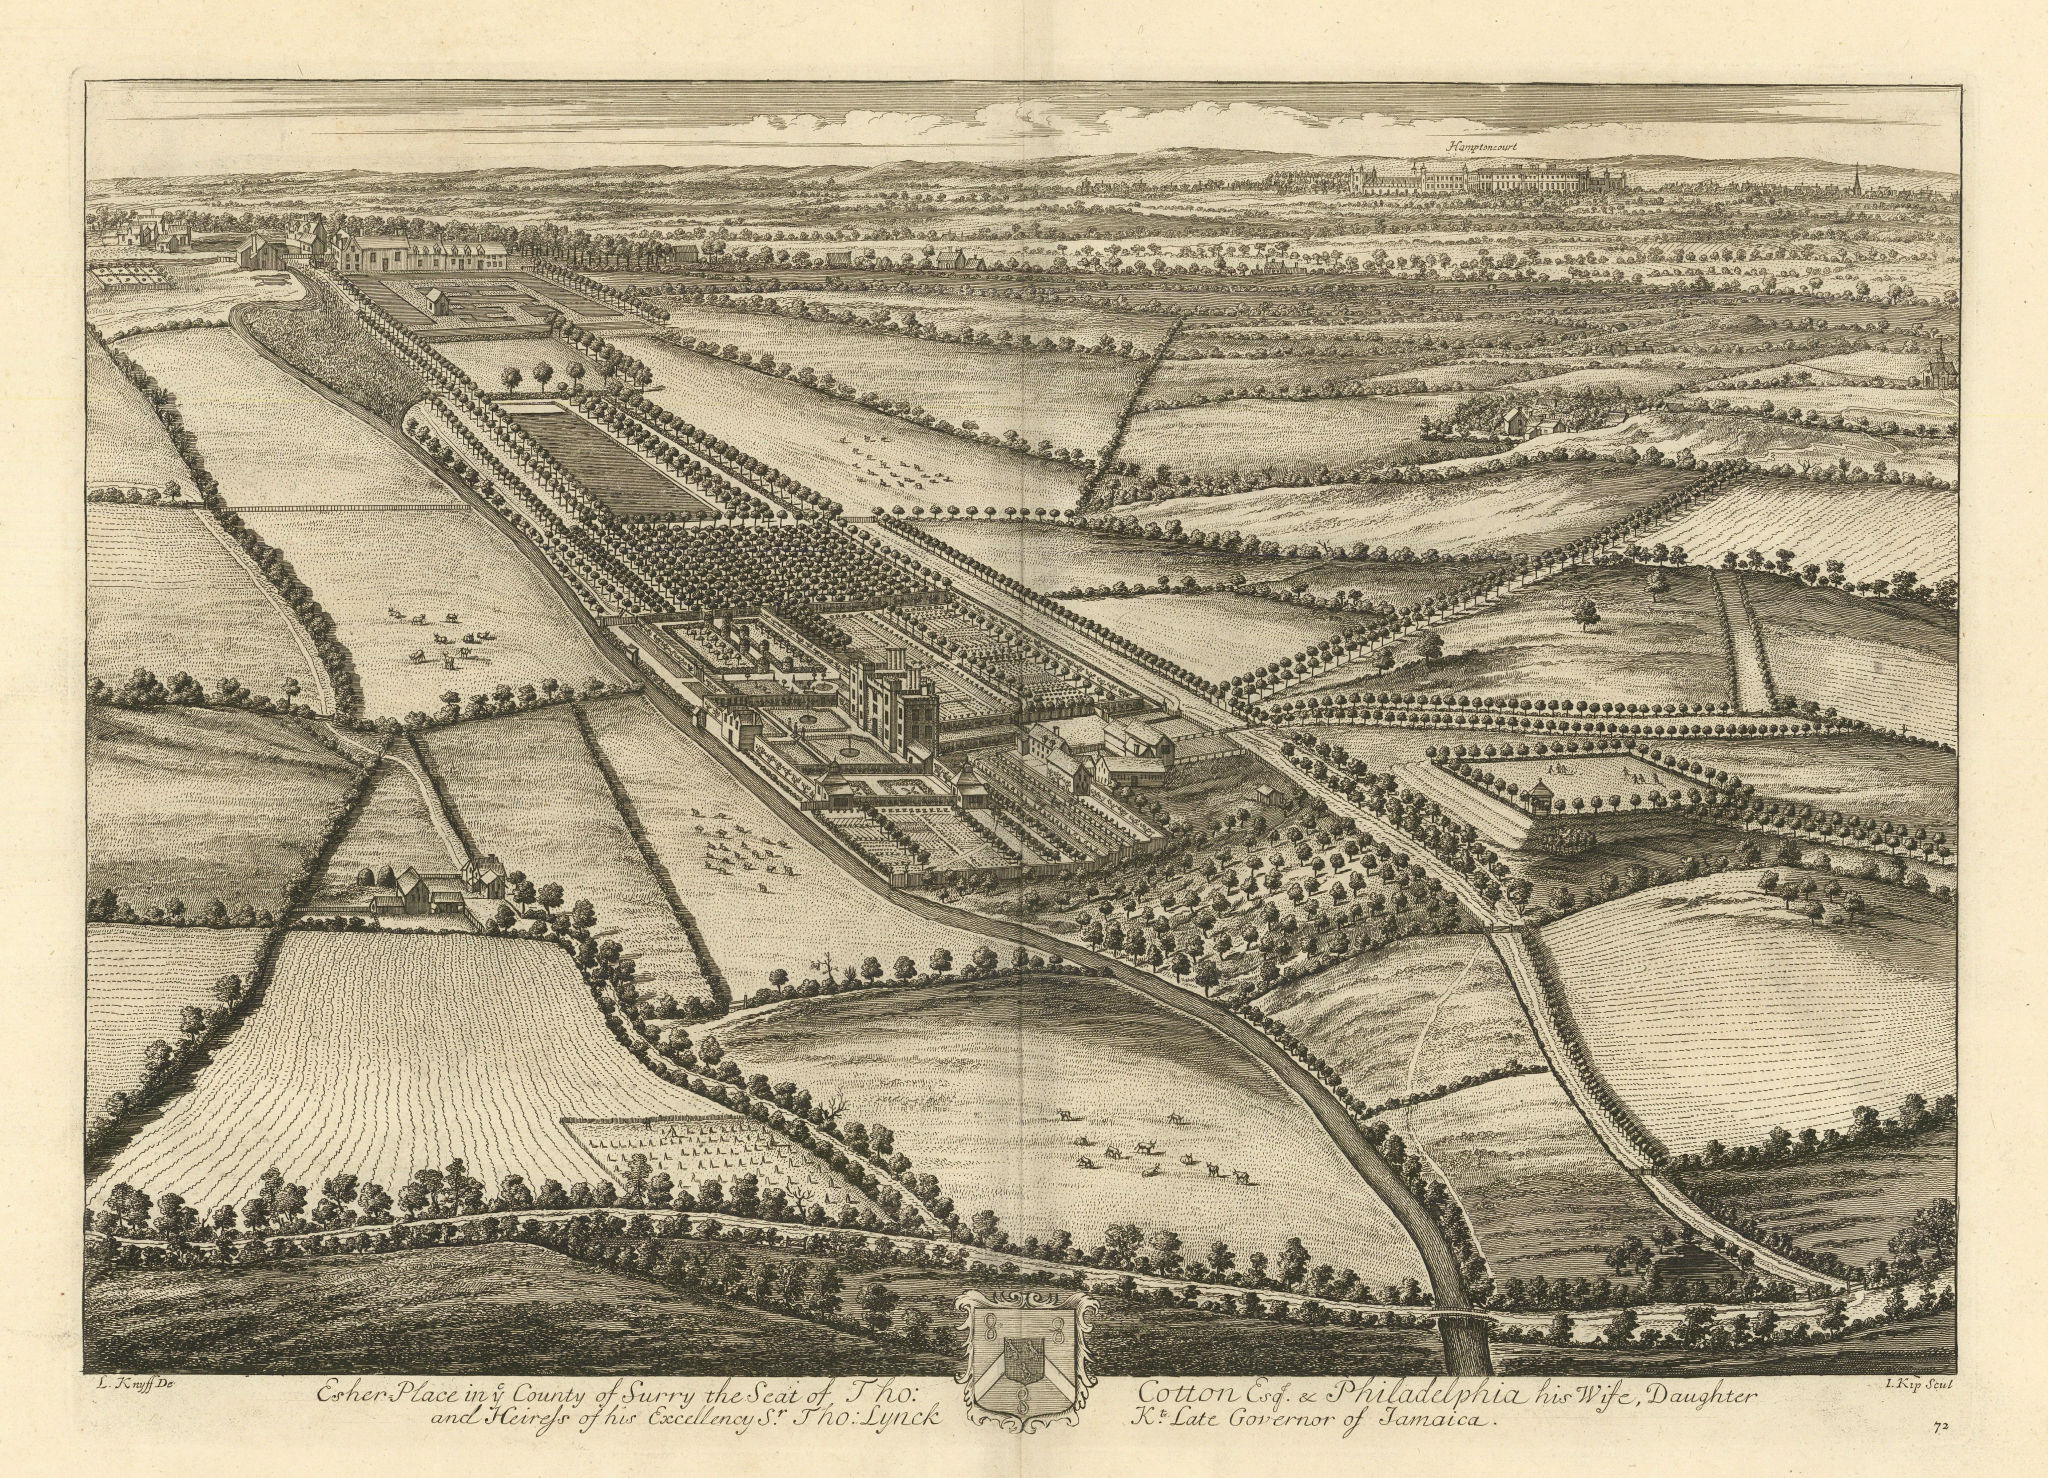 Associate Product Esher Place in ye County of of Surry by Kip/Kynff. London / Surrey 1709 print